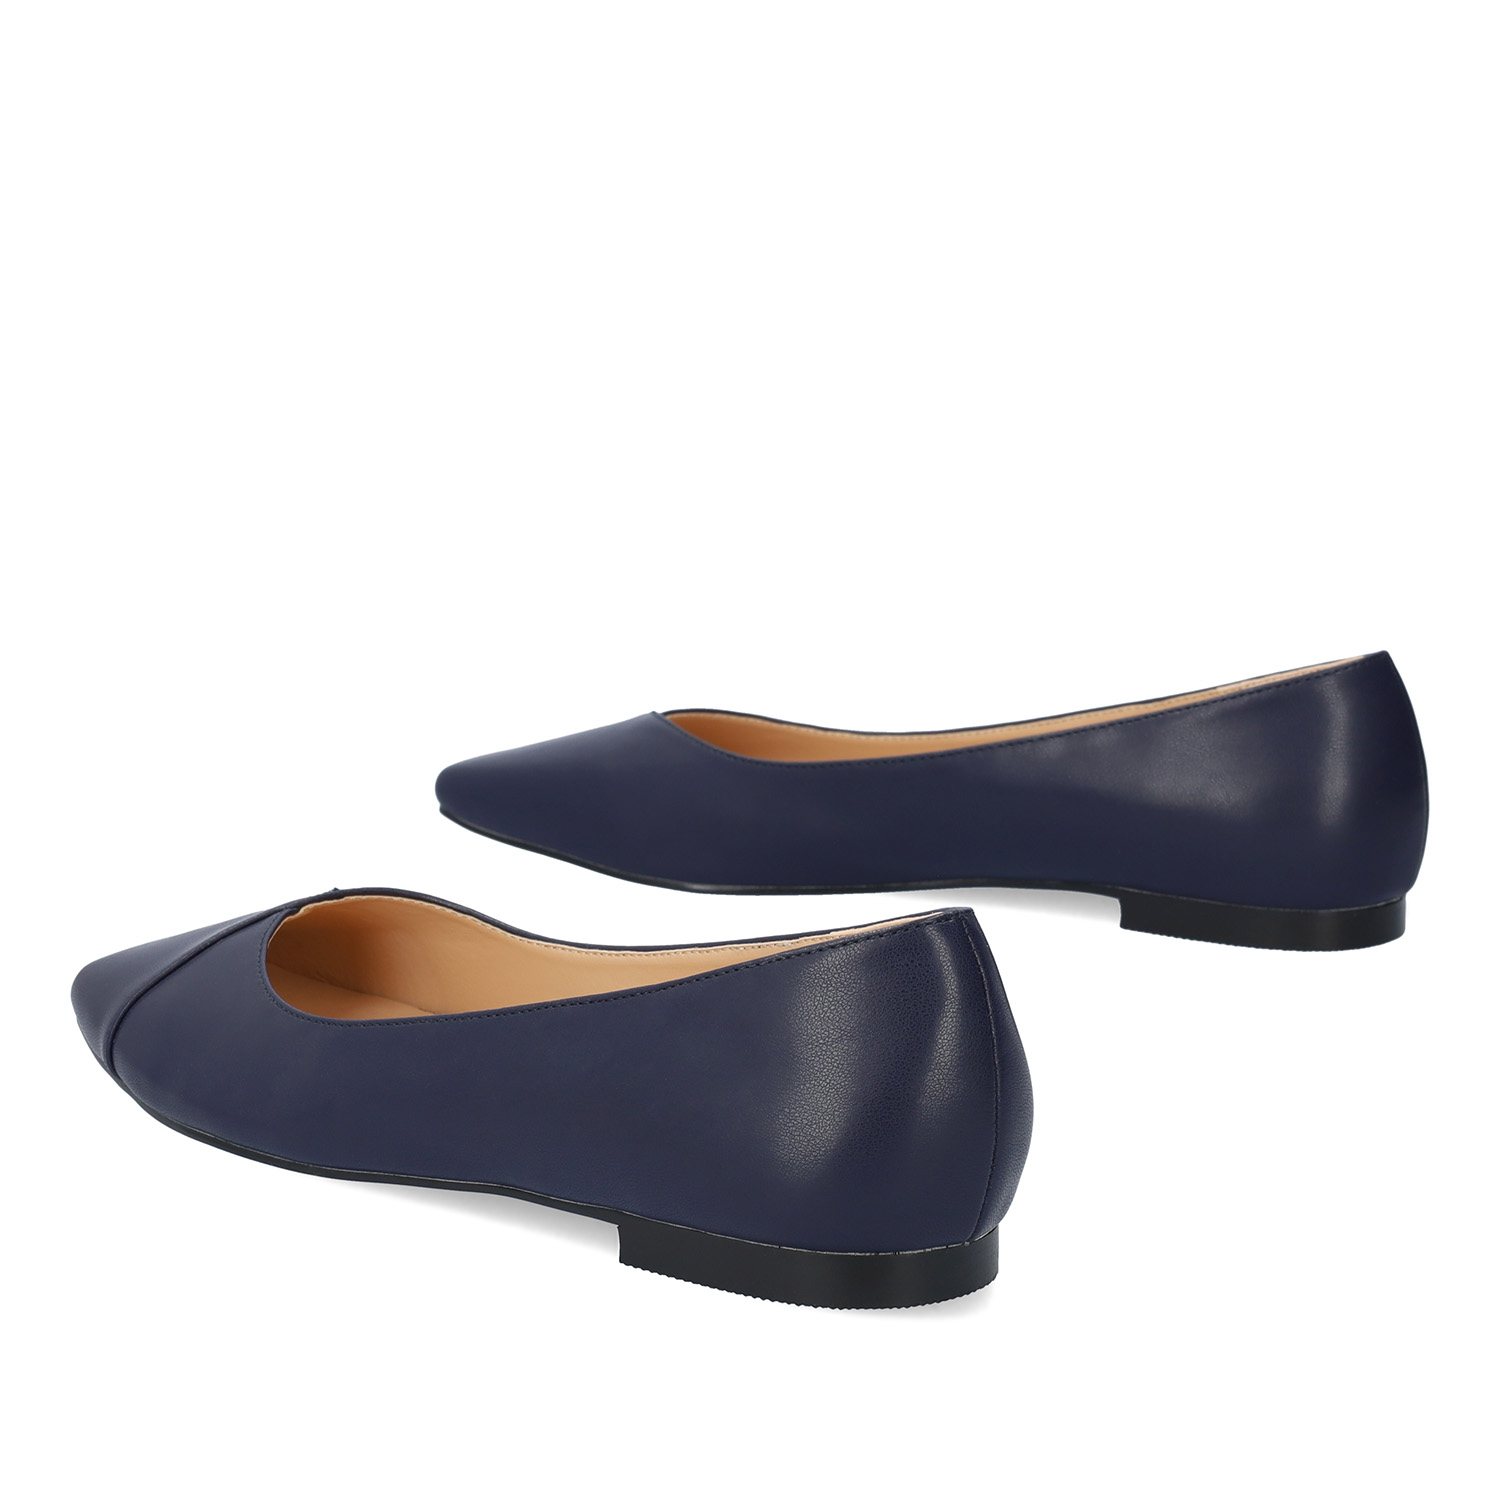 Navy coloured faux leather ballerina 